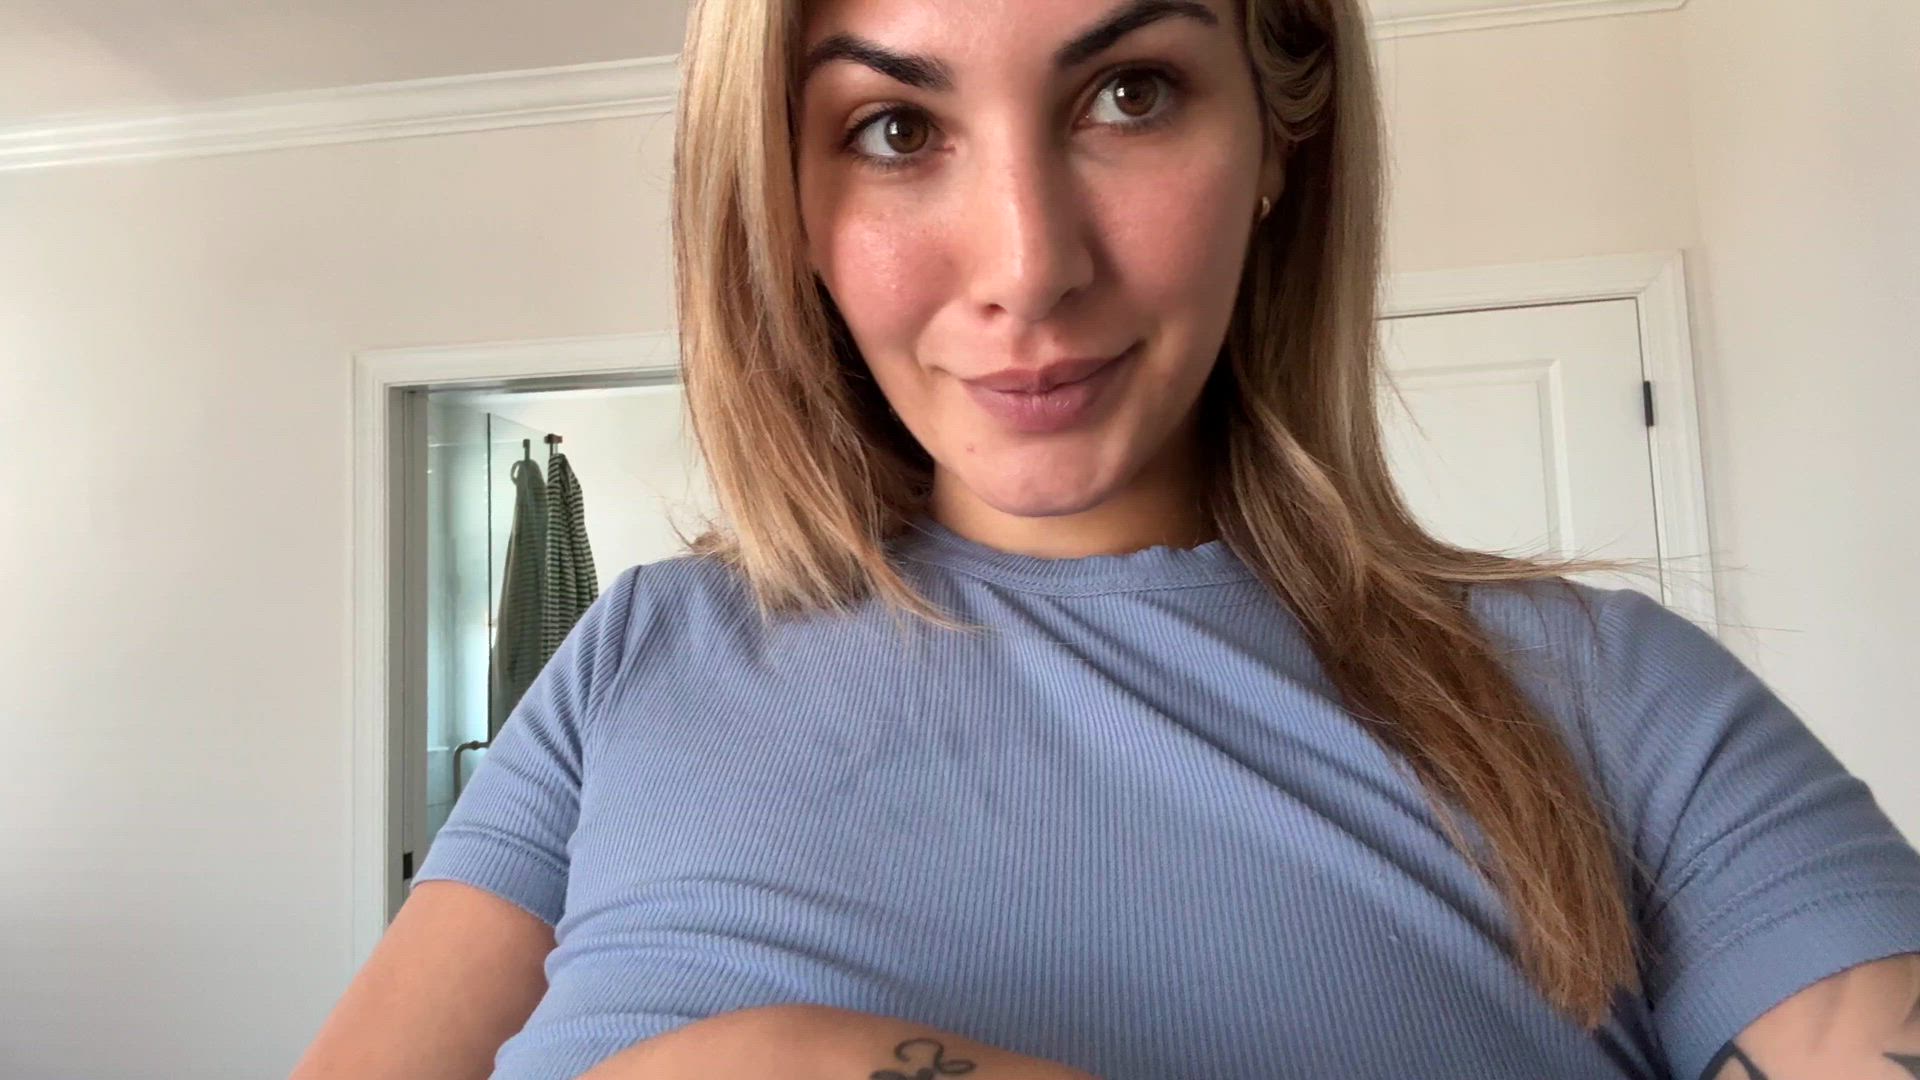 MILF porn video with onlyfans model spicysweetone <strong>@spicysweetonee2</strong>